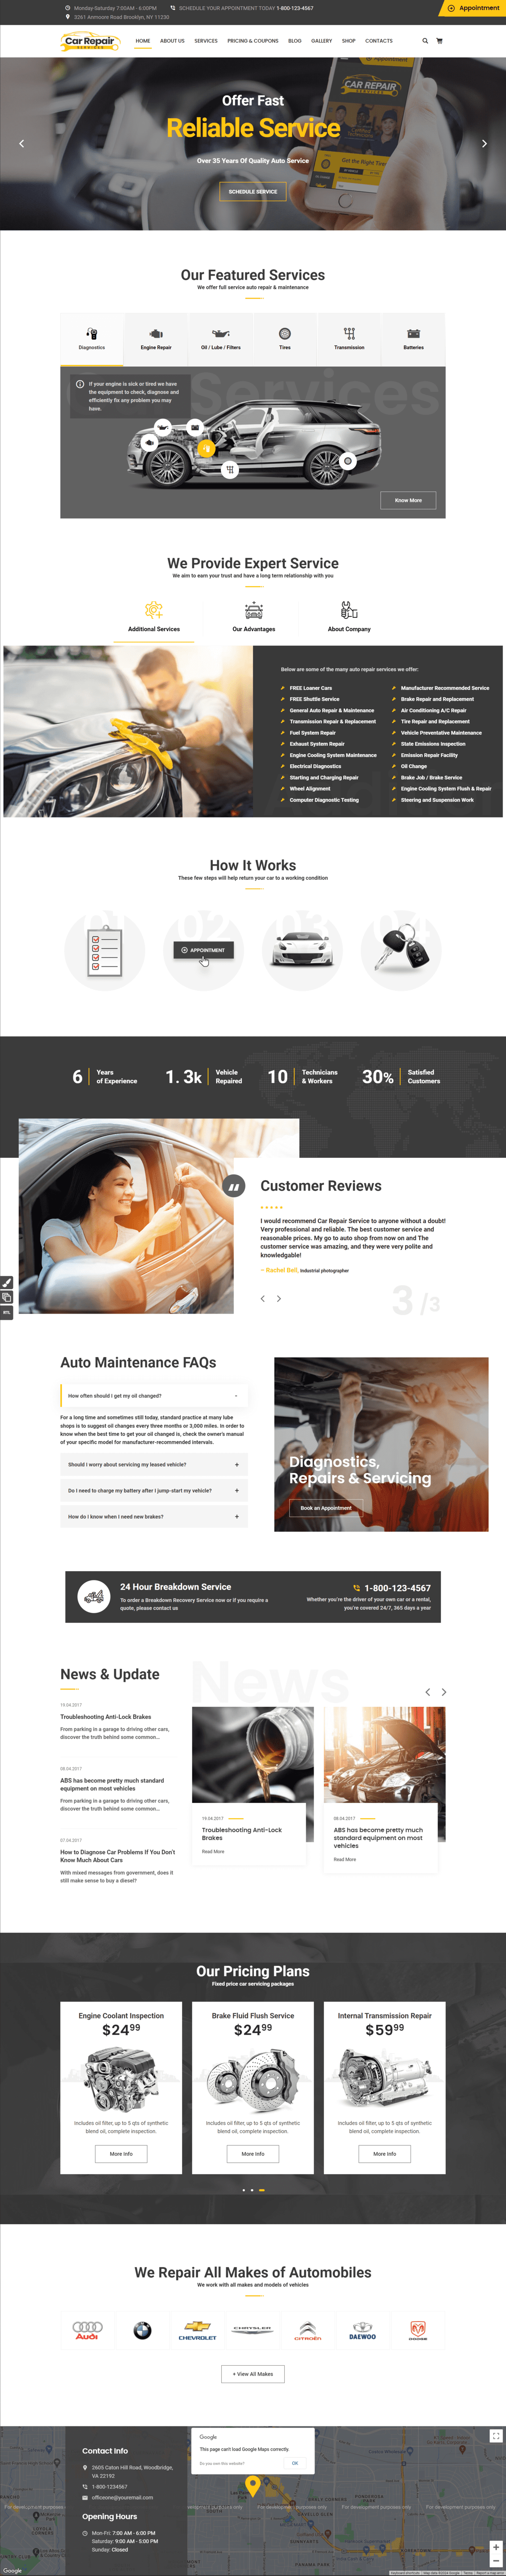 website design for Mobile mechanic and auto repair shops